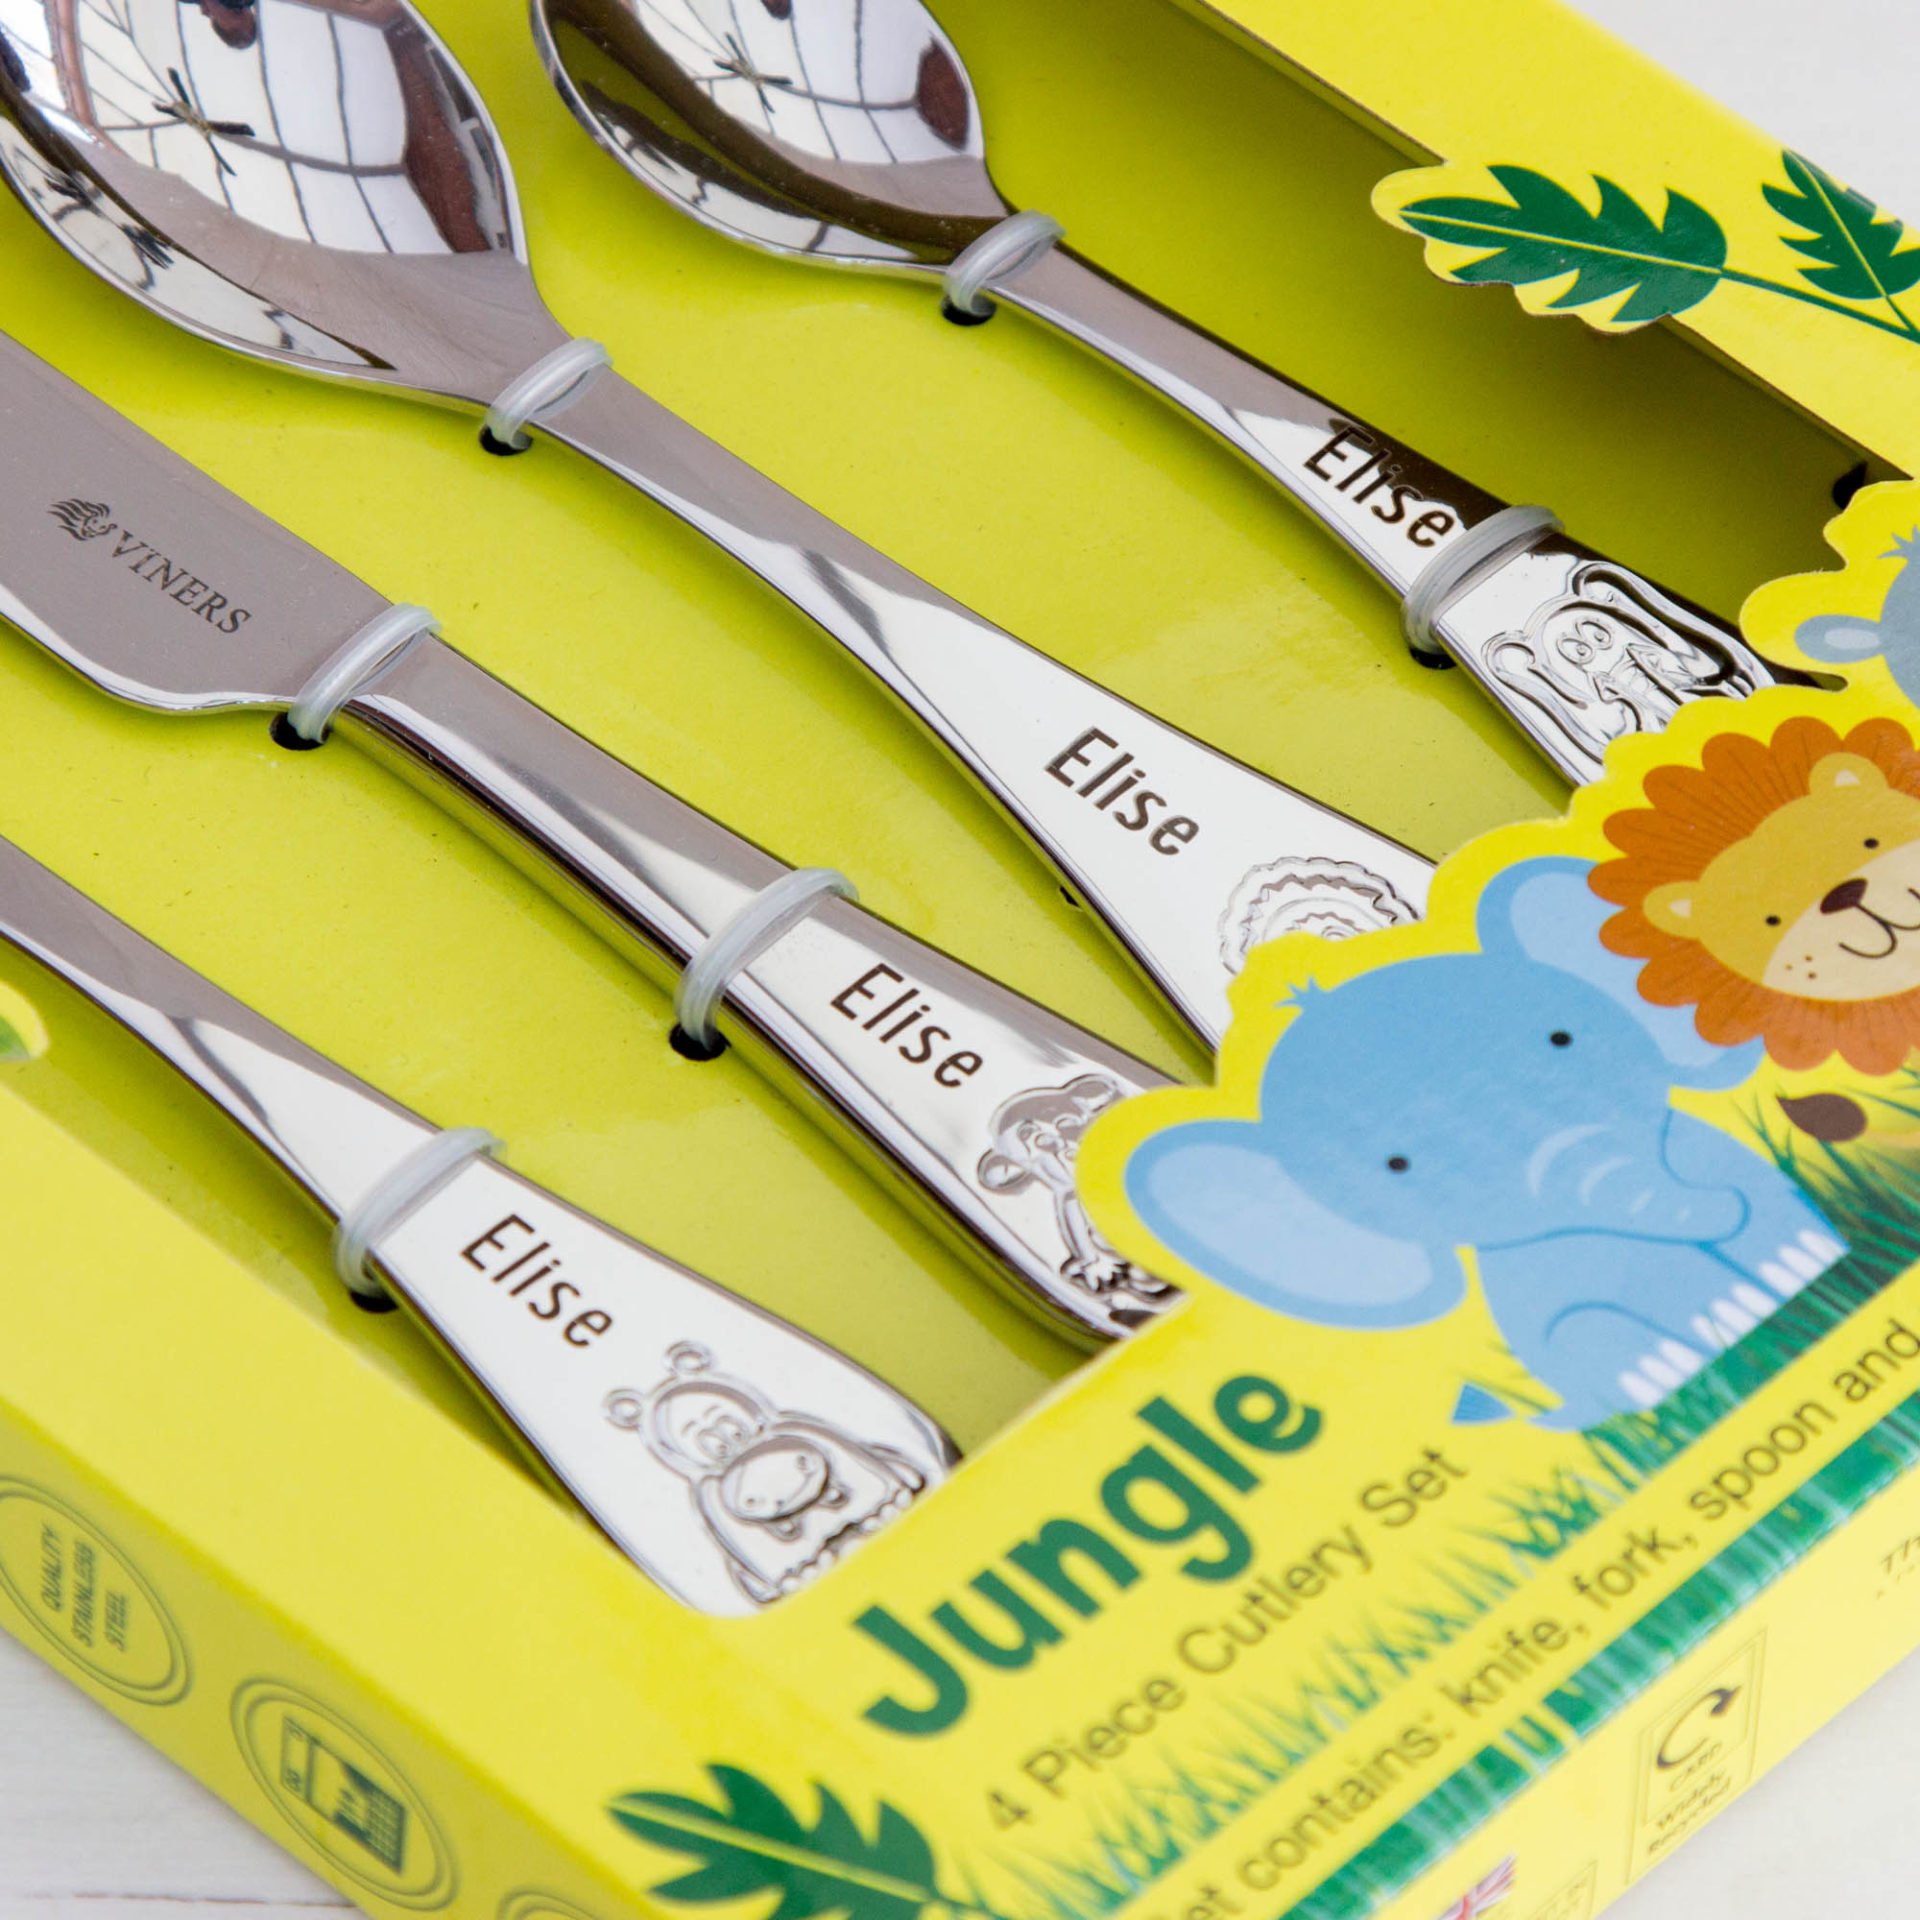 Personalised Engraved Childrens Kids Cutlery Set Fairy Mermaid Unicorn Enchanted Viners in a Bespoke Presentation Box with Stainless Steel Straw Christmas Birthday Christening 